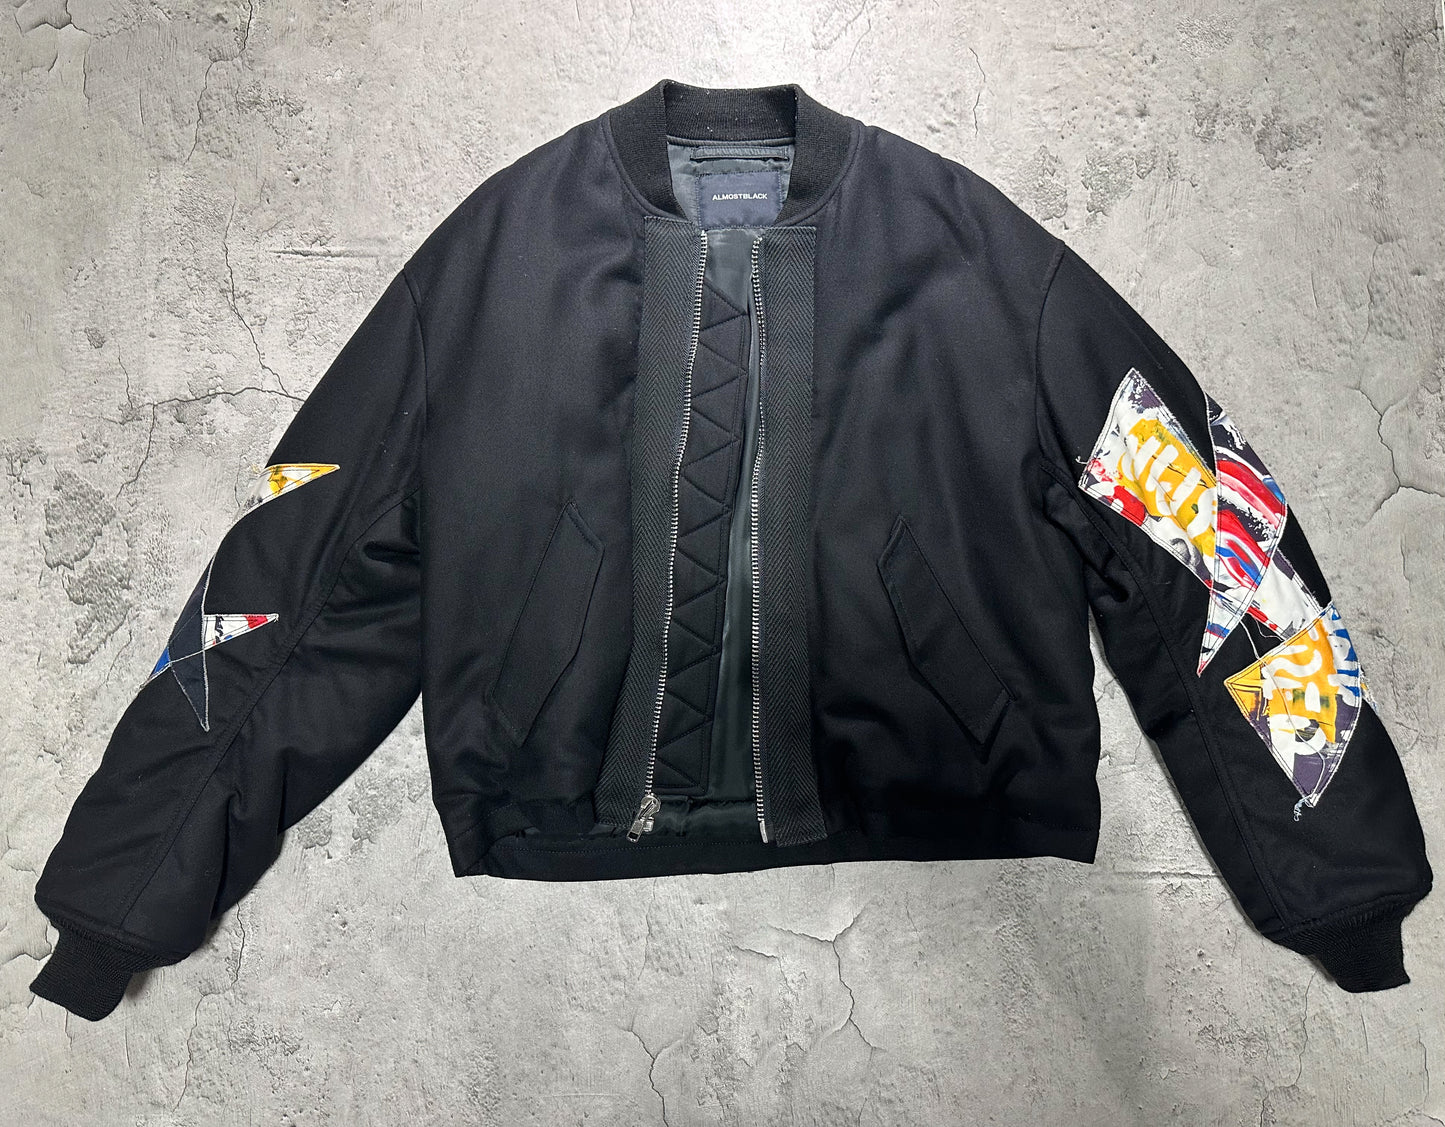 ALMOST BLACK bomber jacket 16AW